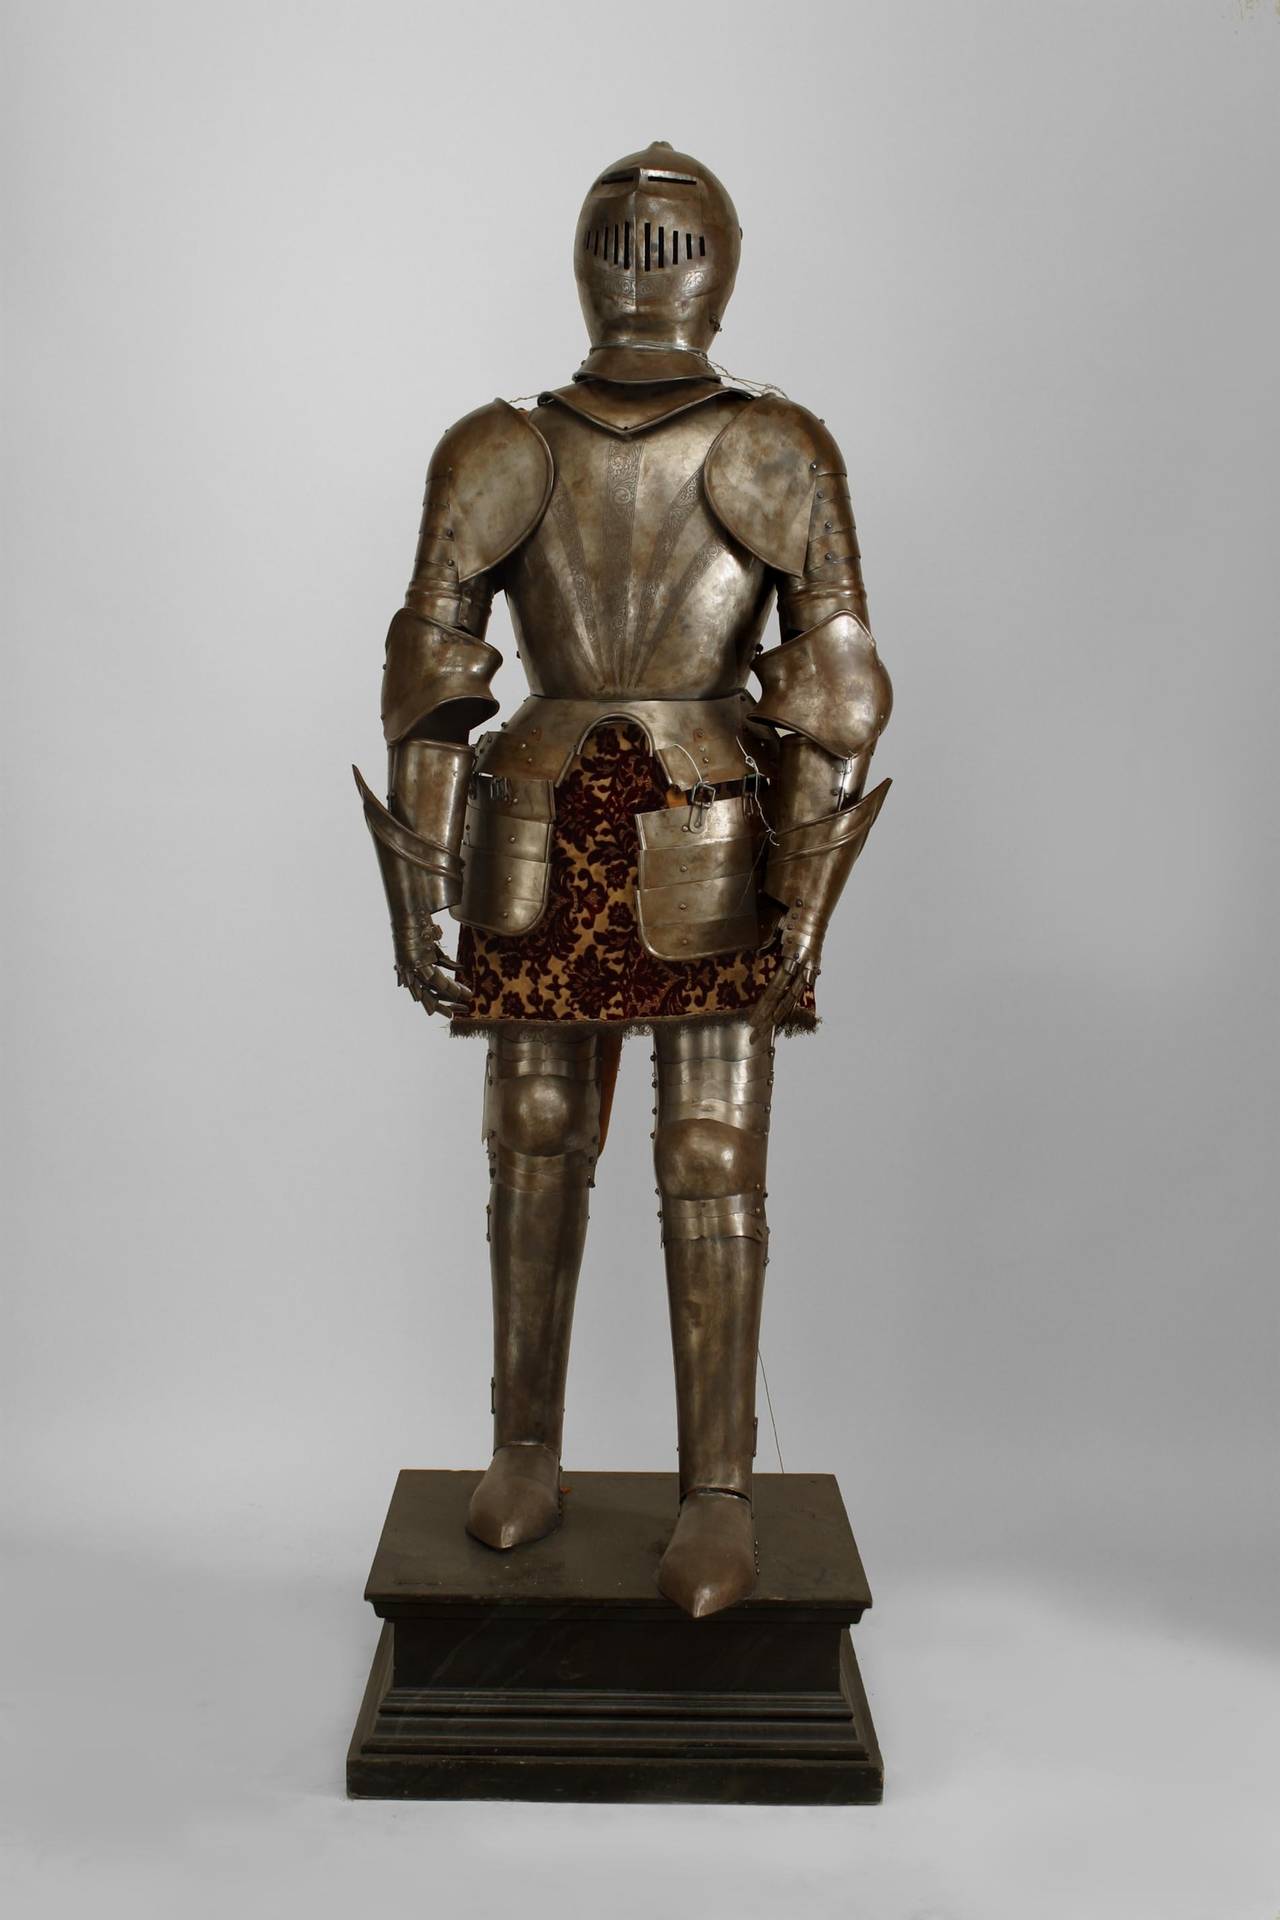 Italian Medieval / Renaissance style metal life size suit of armor with etched
sunburst breast plate.